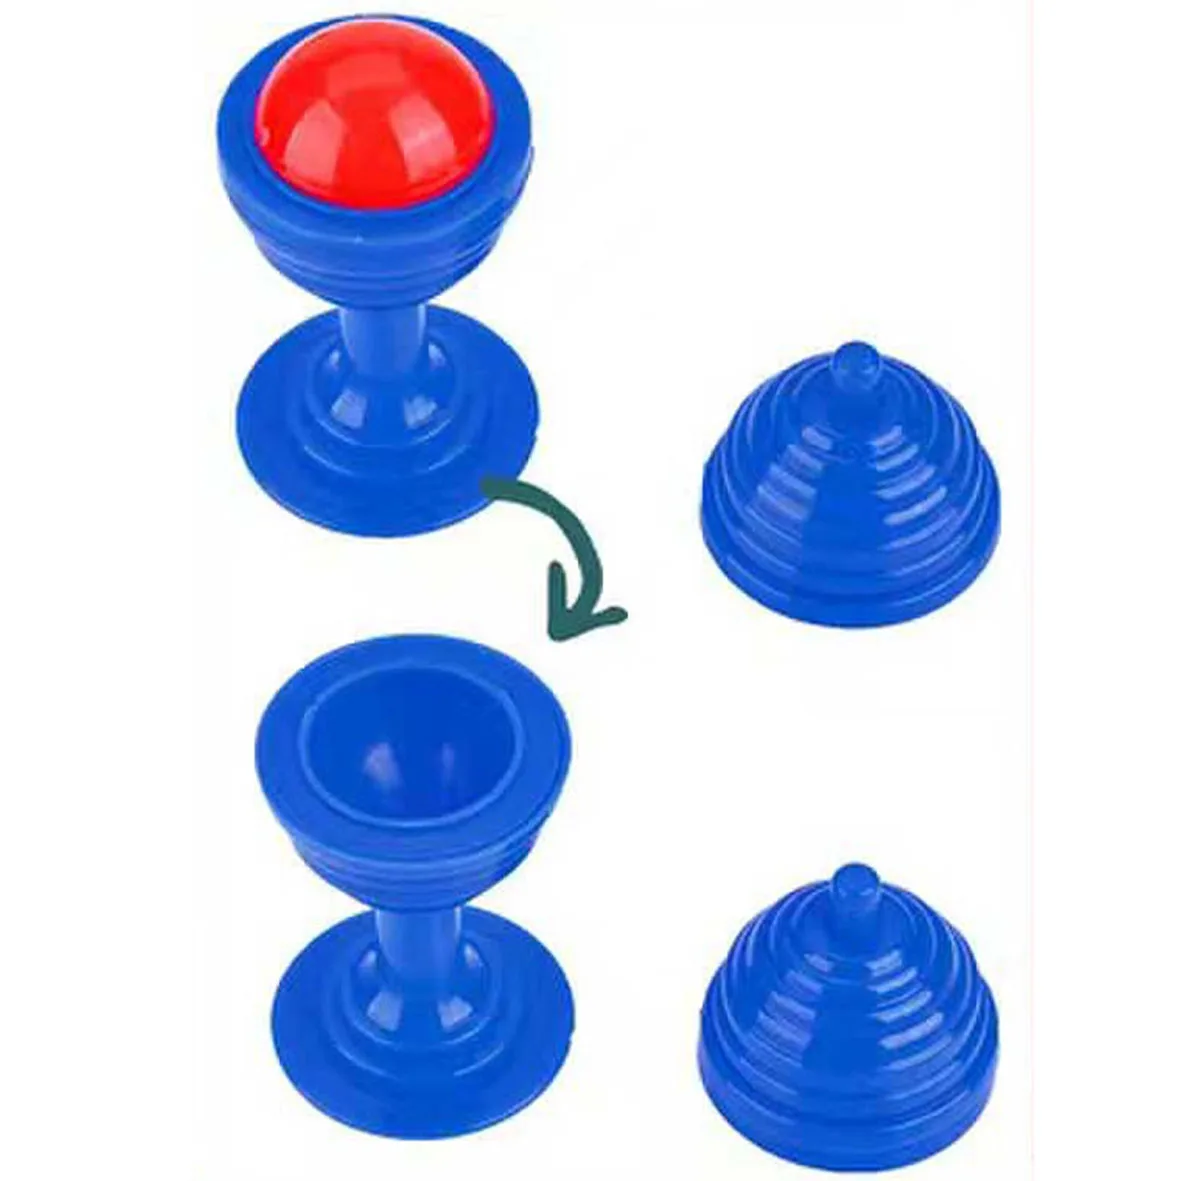 Wholesale Party Show Magic Props for Beginners Magic Vase and Balls Magic Trick Toys (1600686975974)